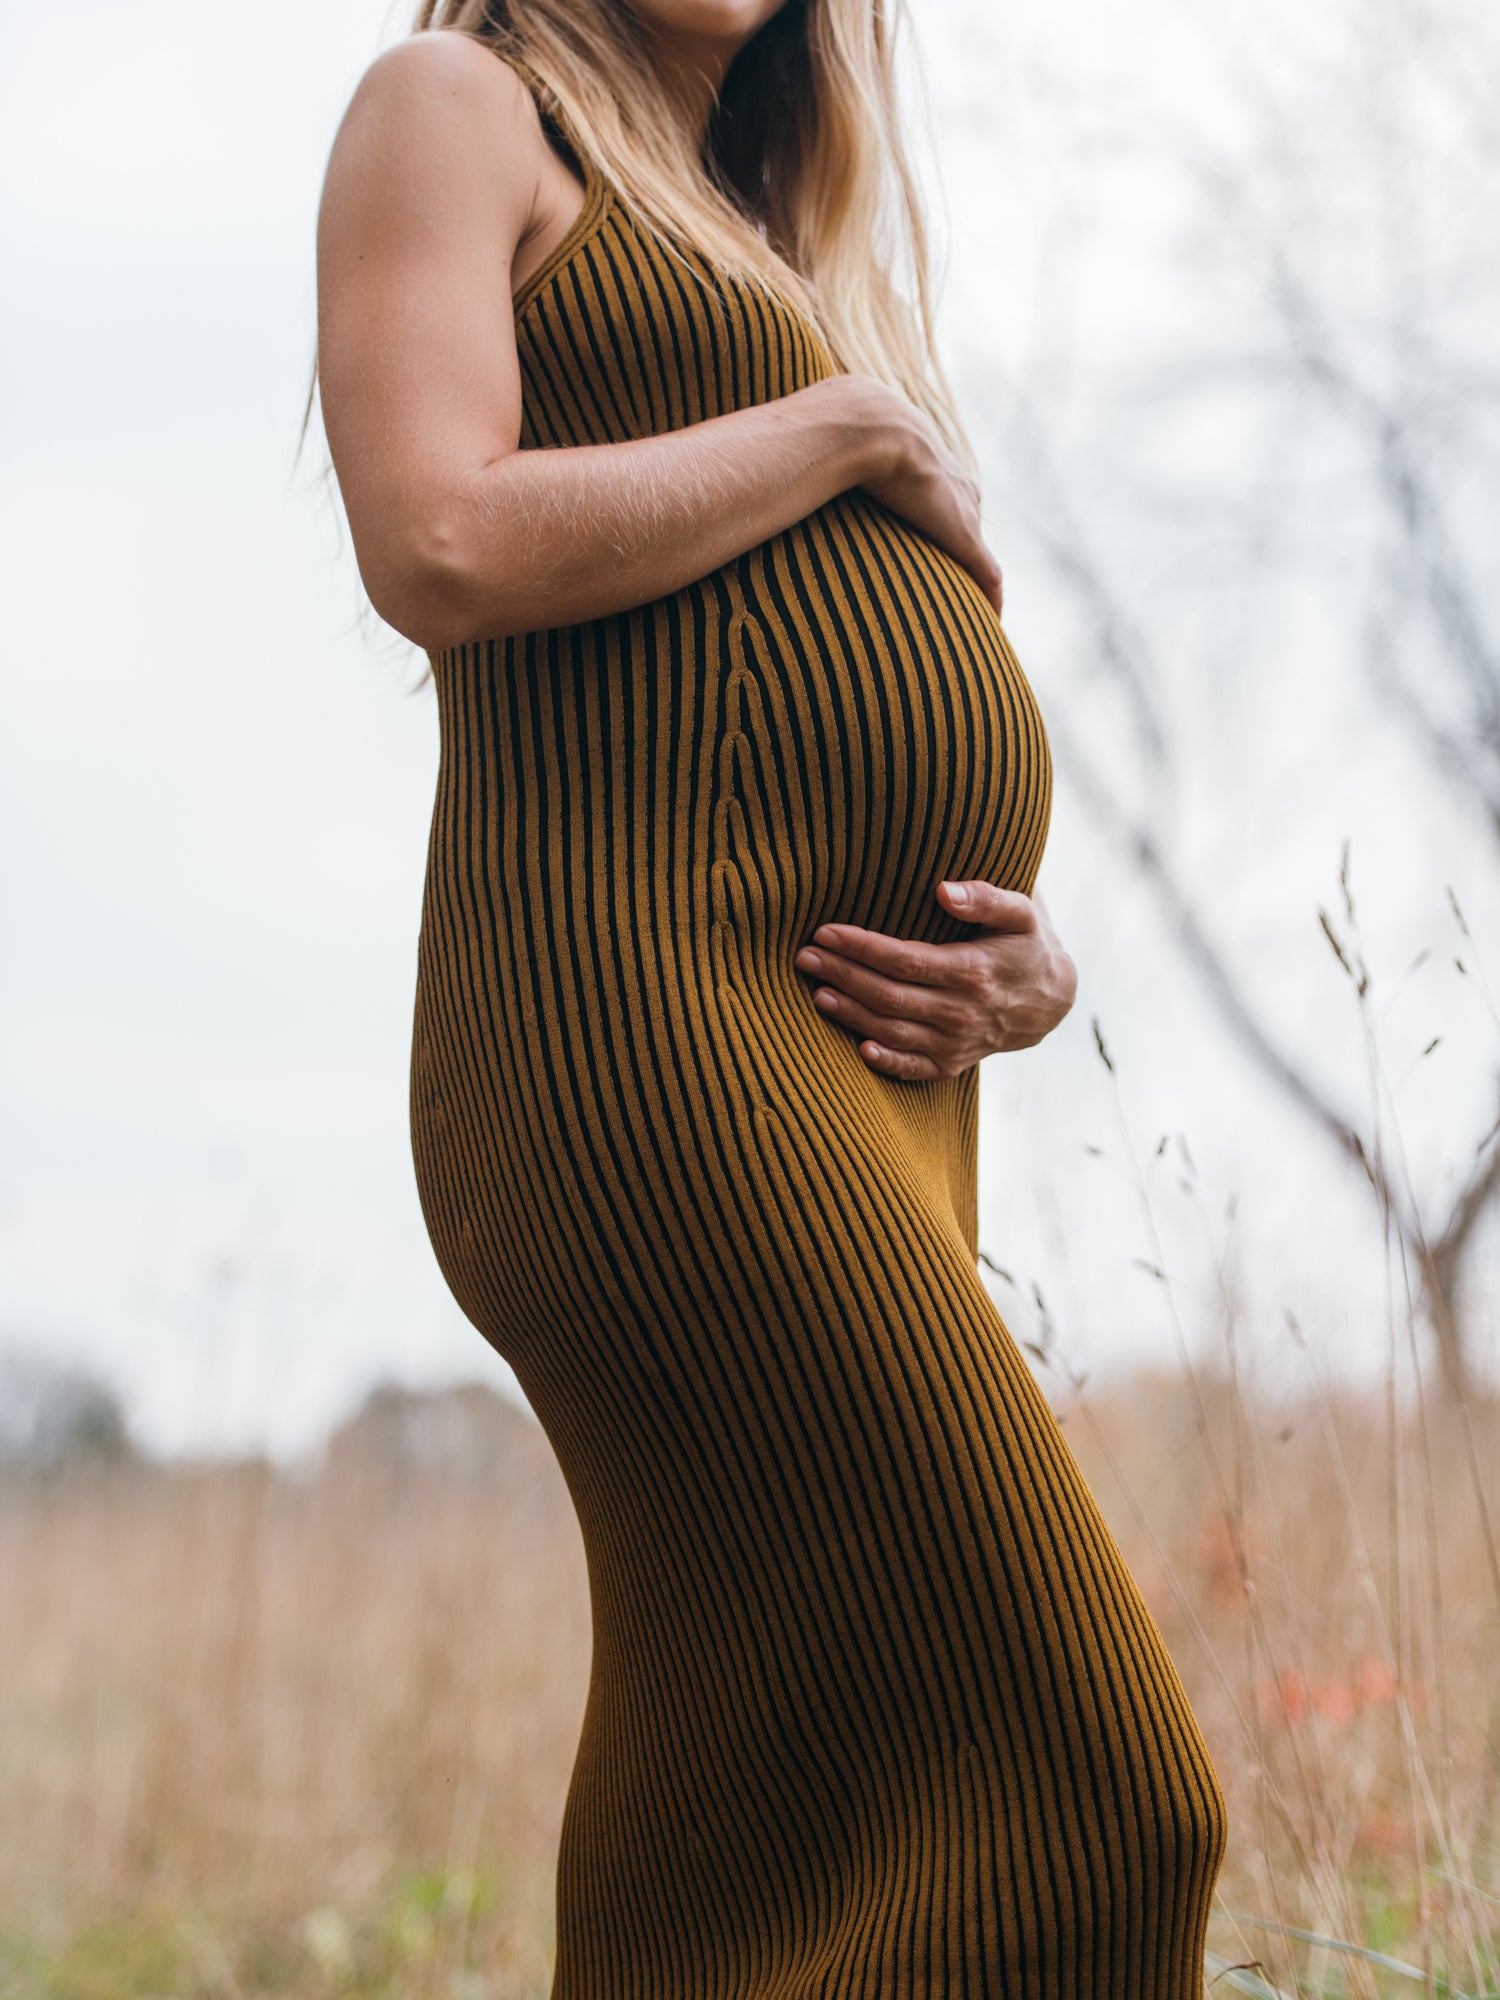 Protein Requirements in Pregnancy are Higher Than Previously Thought - Lily  Nichols RDN